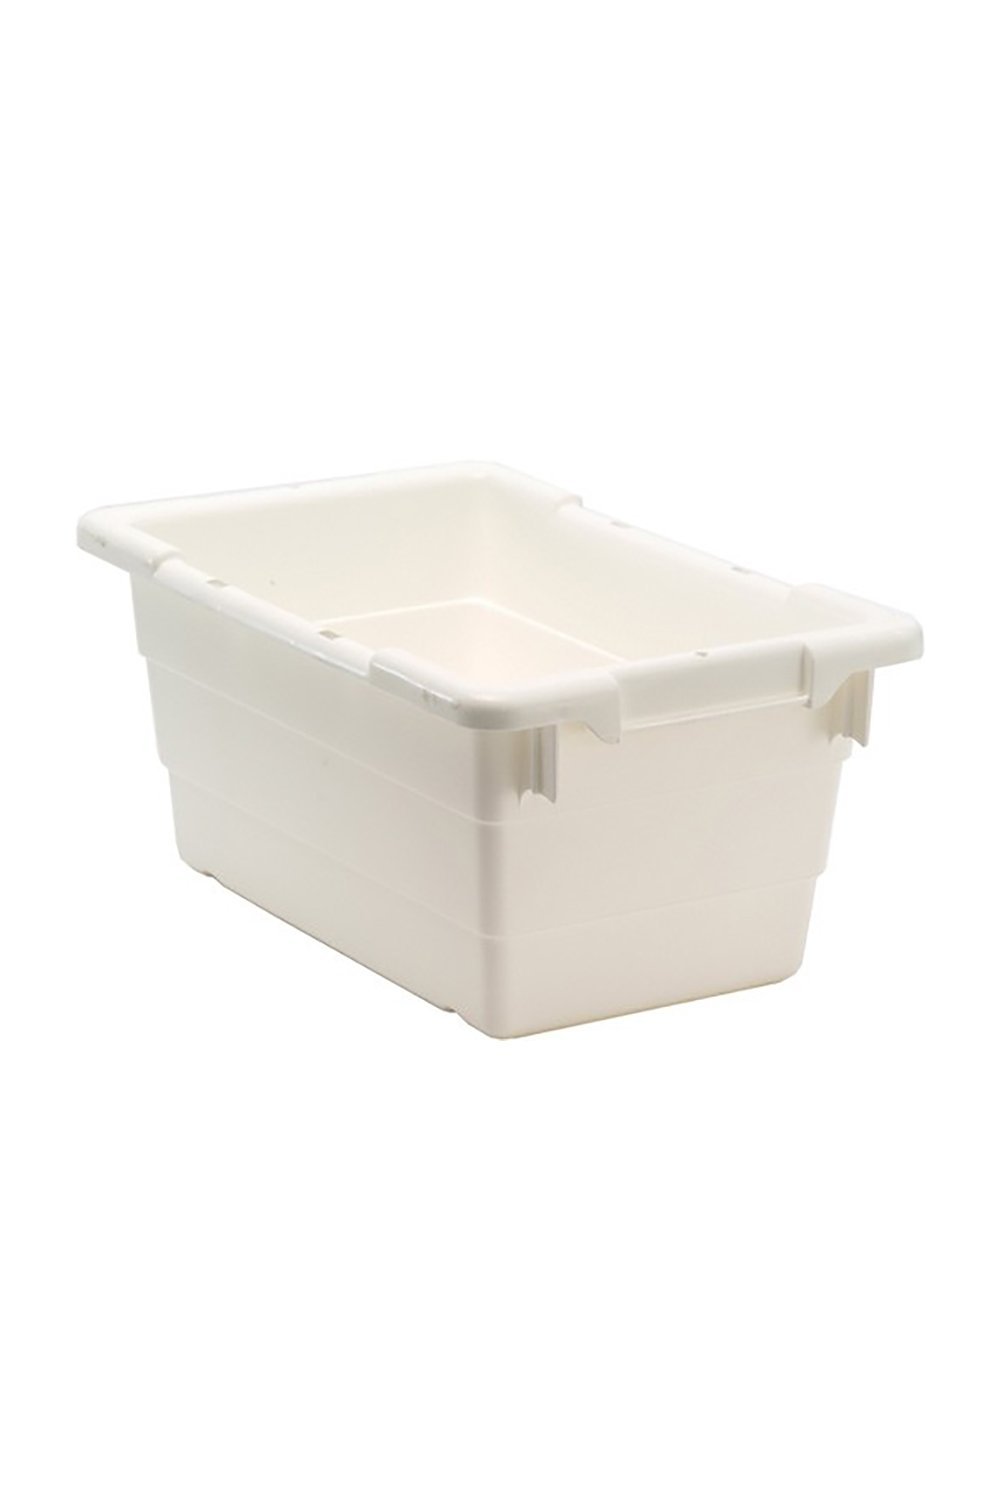 Cross Stack Tub Bins & Containers Acart 17-1/4"L x 11"W x 8"H White 